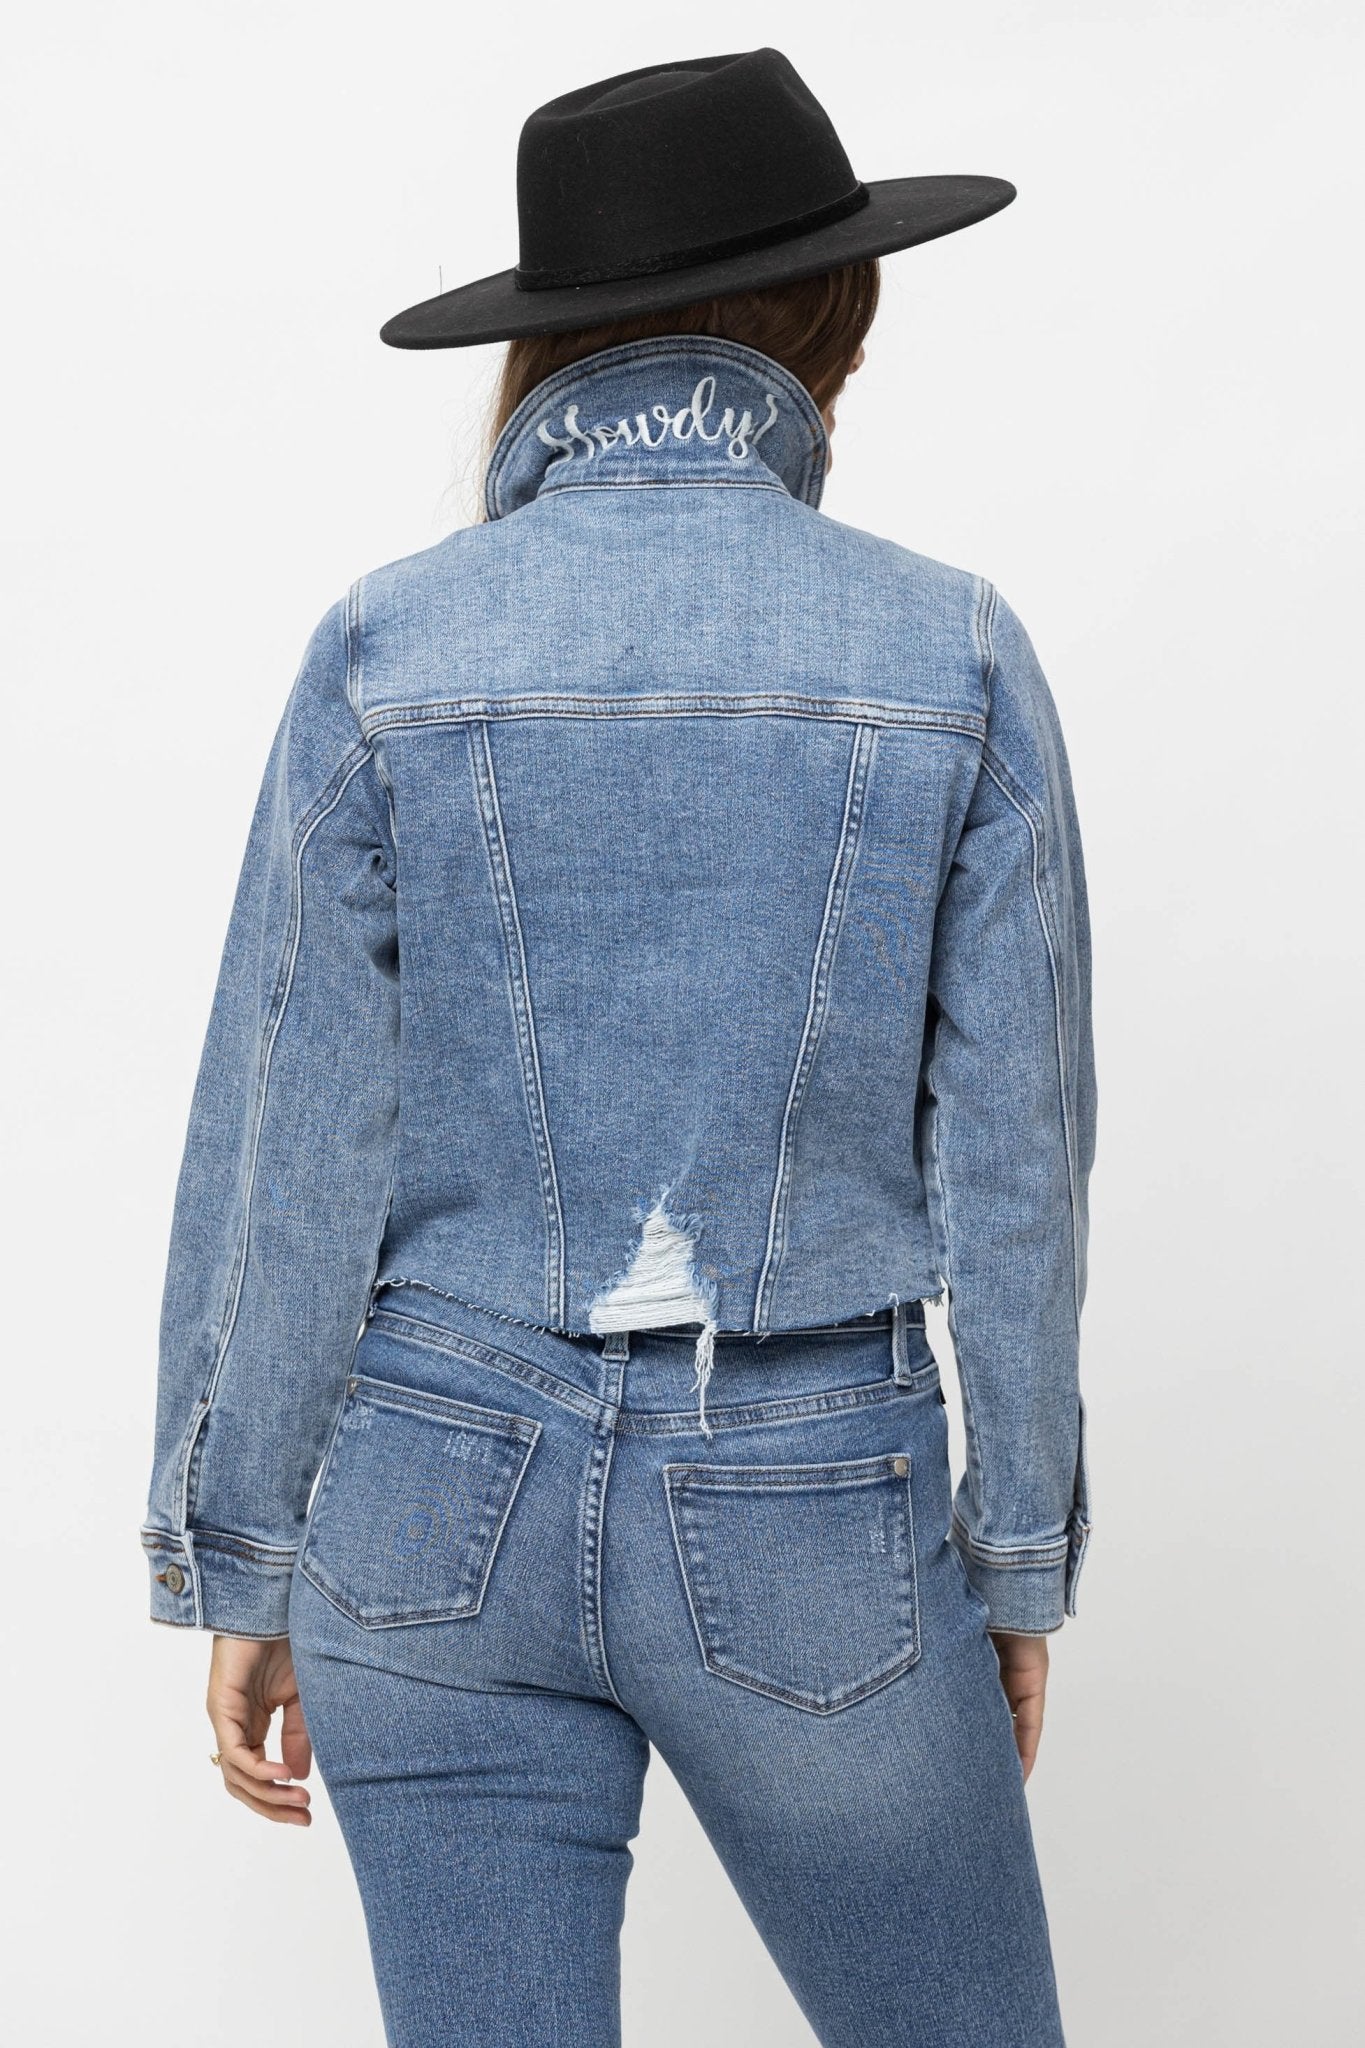 HOWDY JUDY BLUE DENIM JACKET - CountryFide Custom Accessories and Outdoors